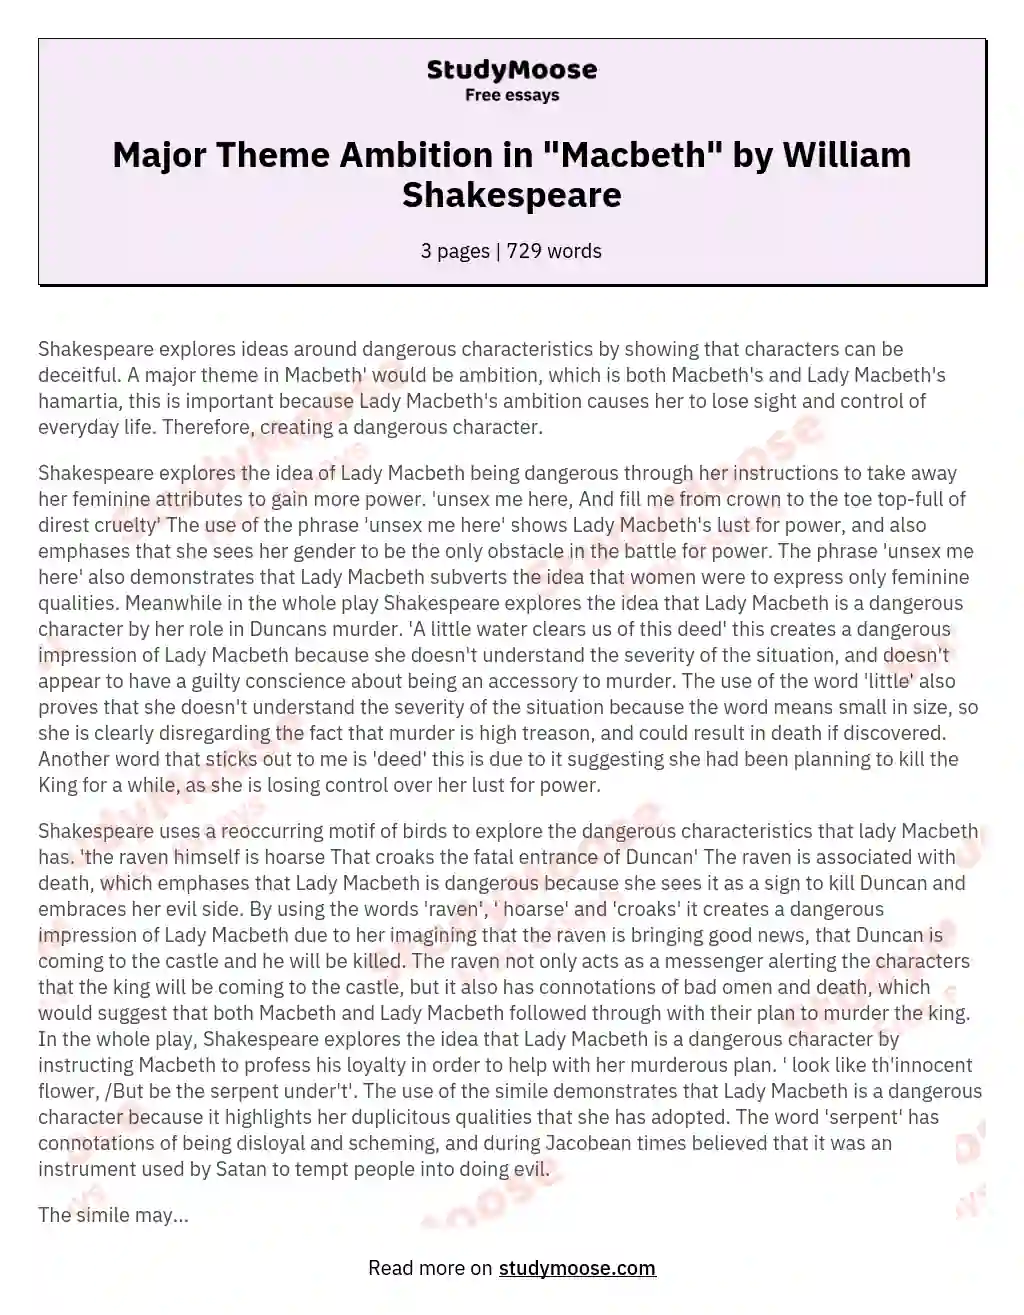 Major Theme Ambition in "Macbeth" by William Shakespeare essay